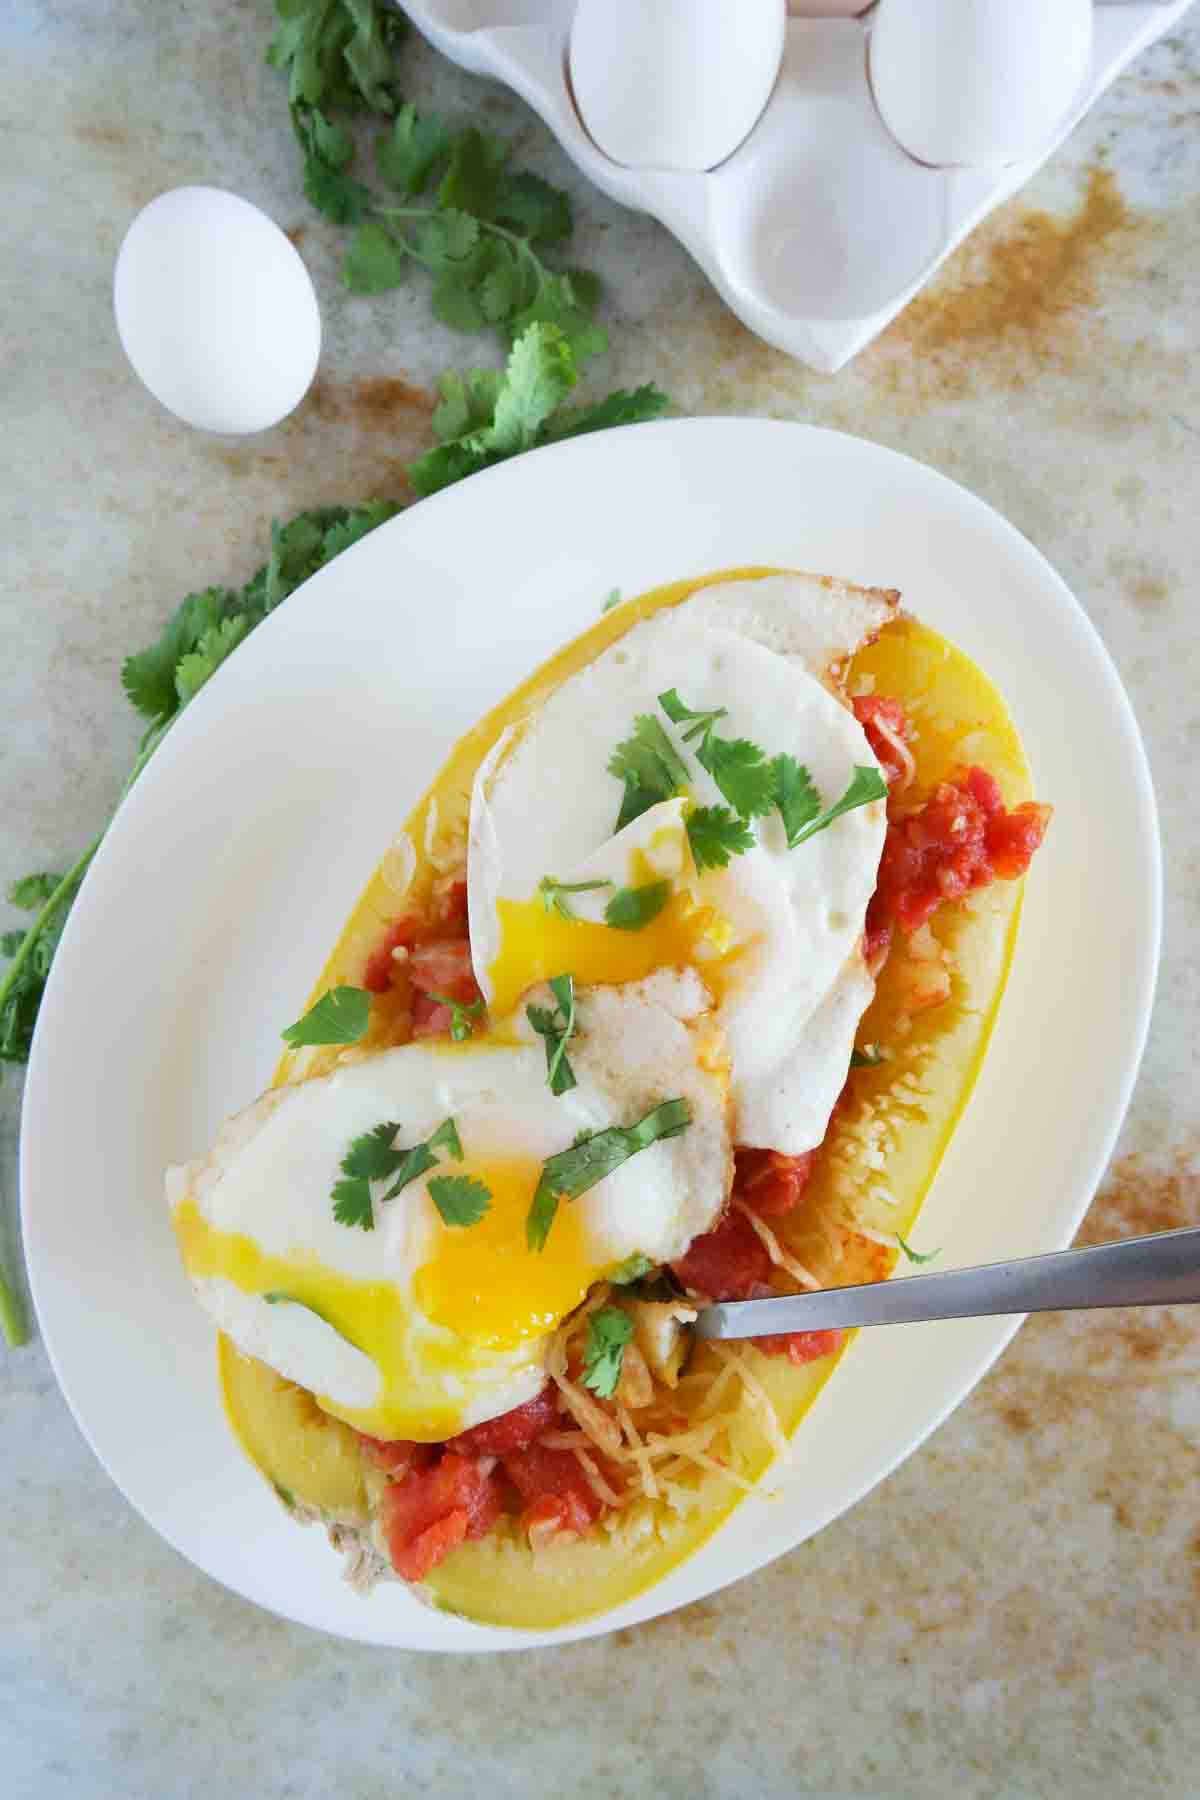 spaghetti squash with tomato sauce topped with 2 fried eggs.